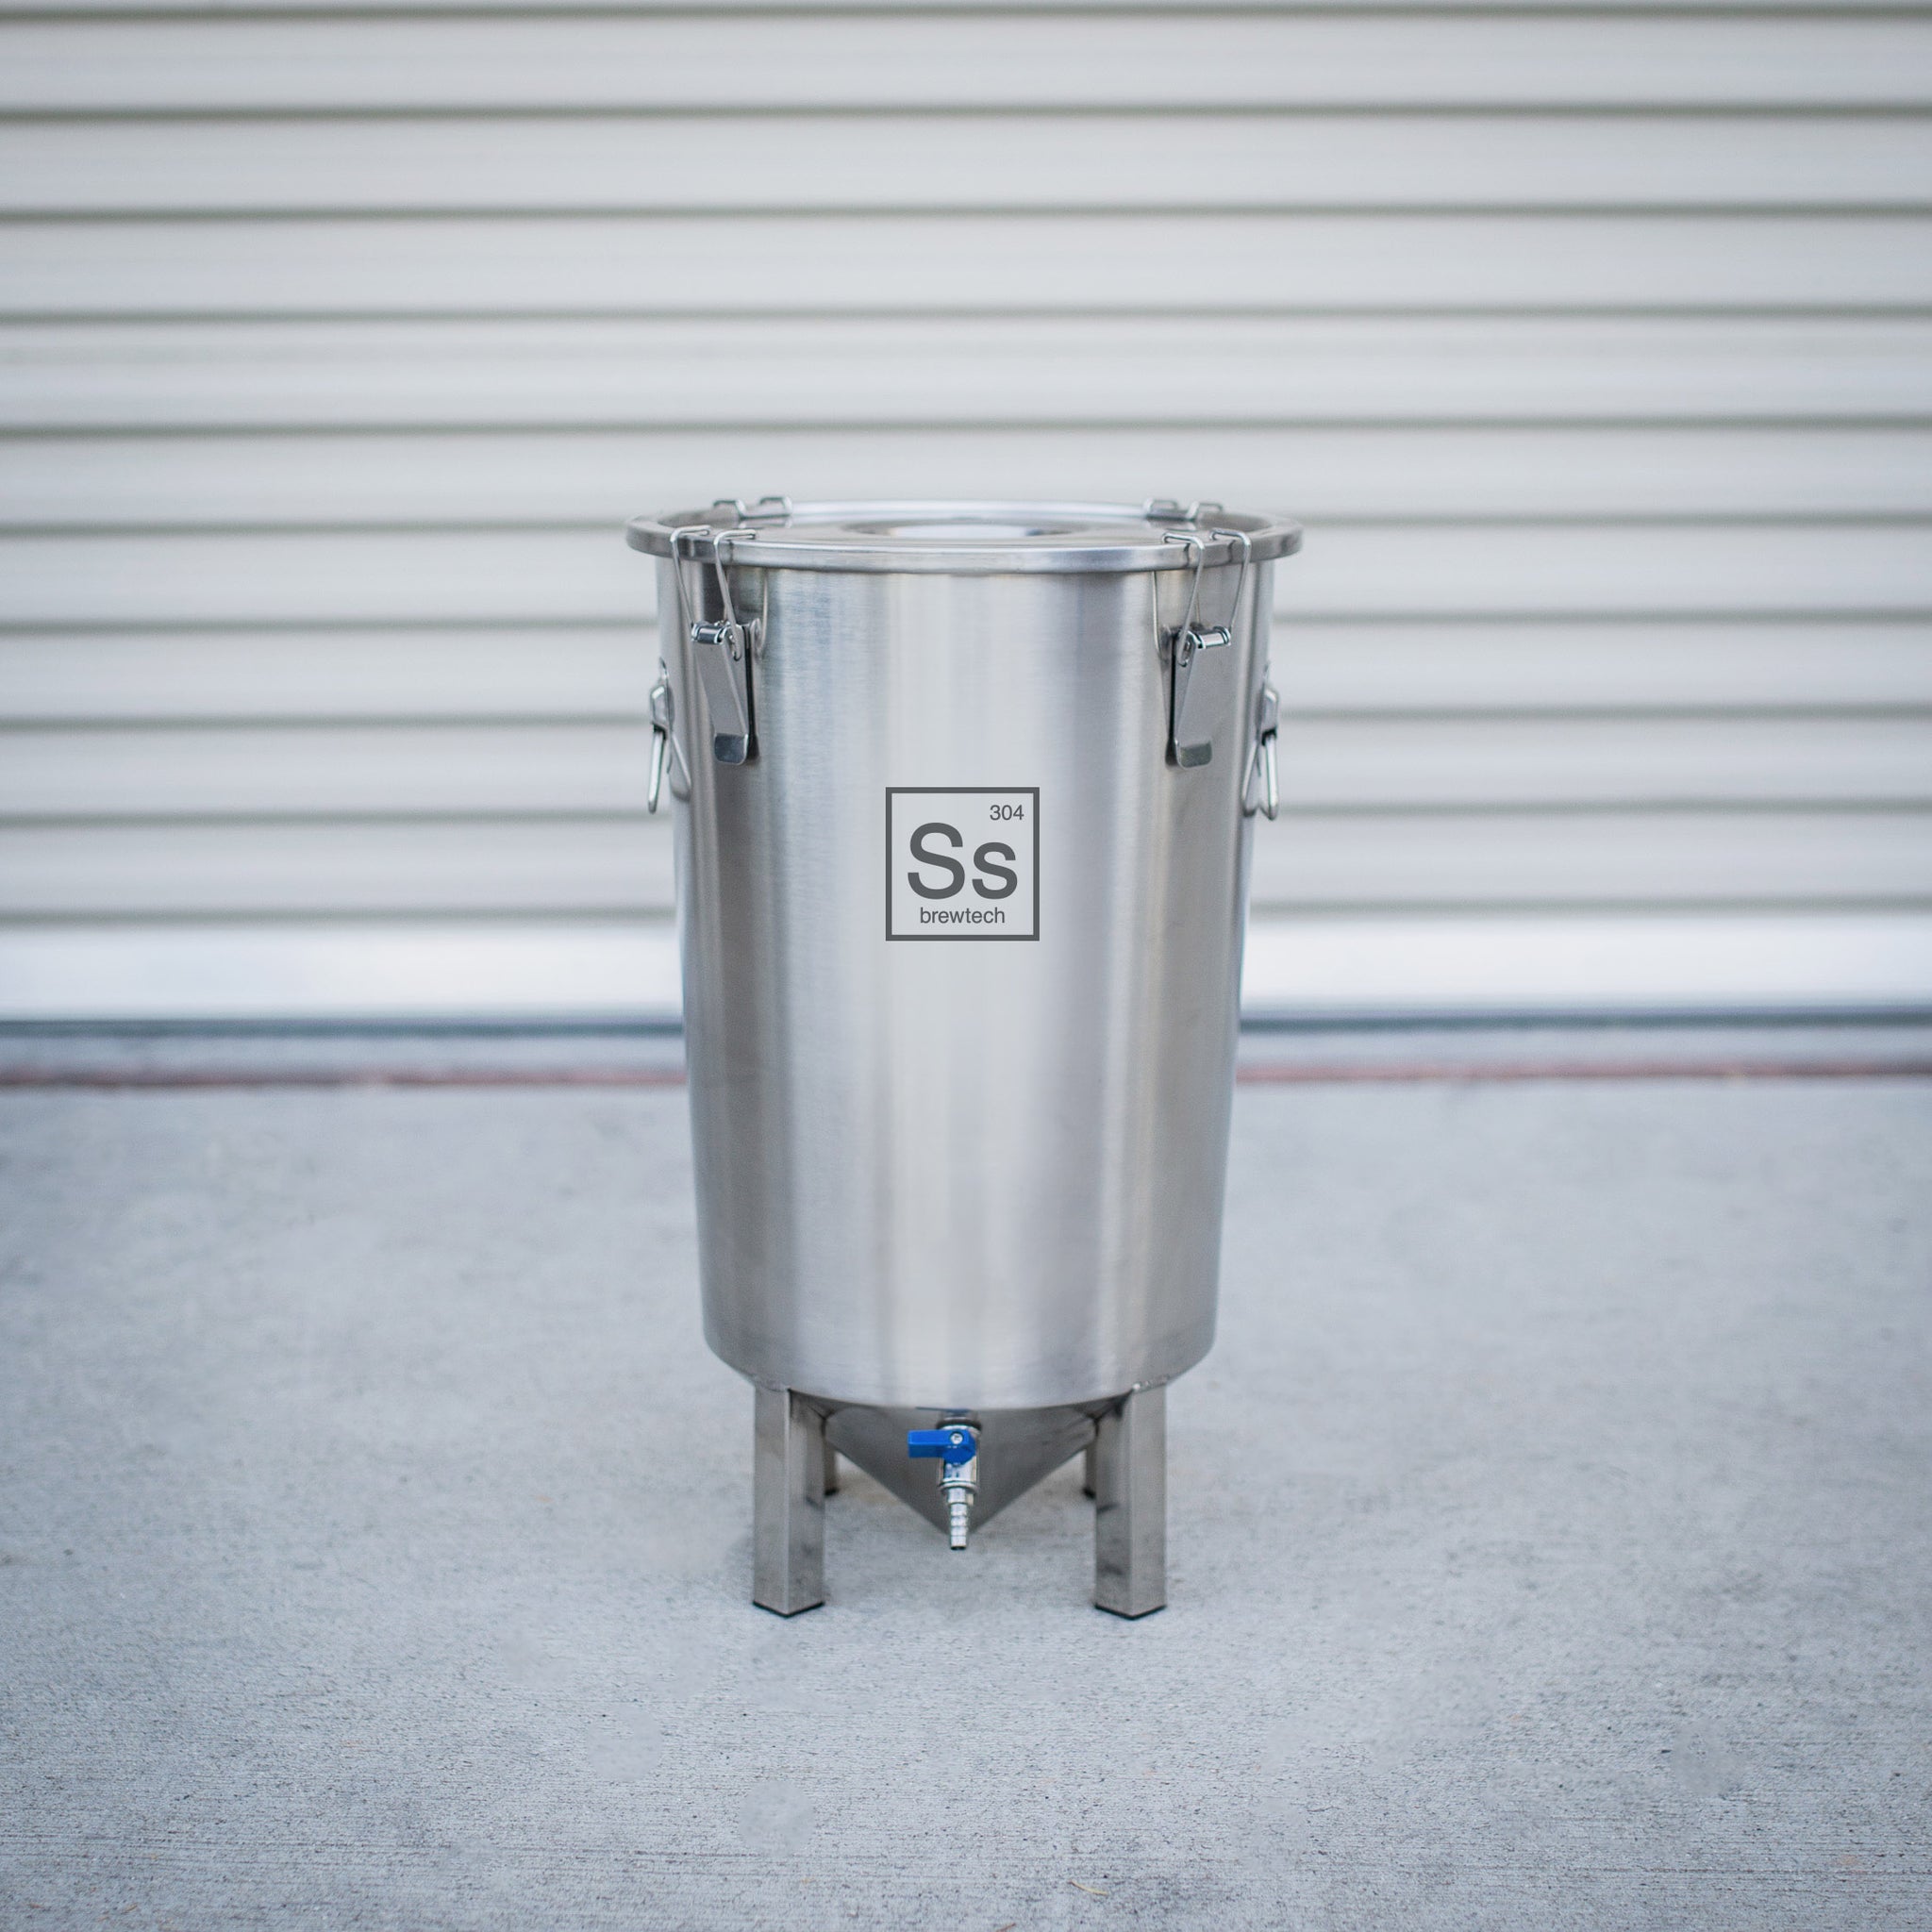 Stainless steel bucket with handle - Buckets & Measuring jugs